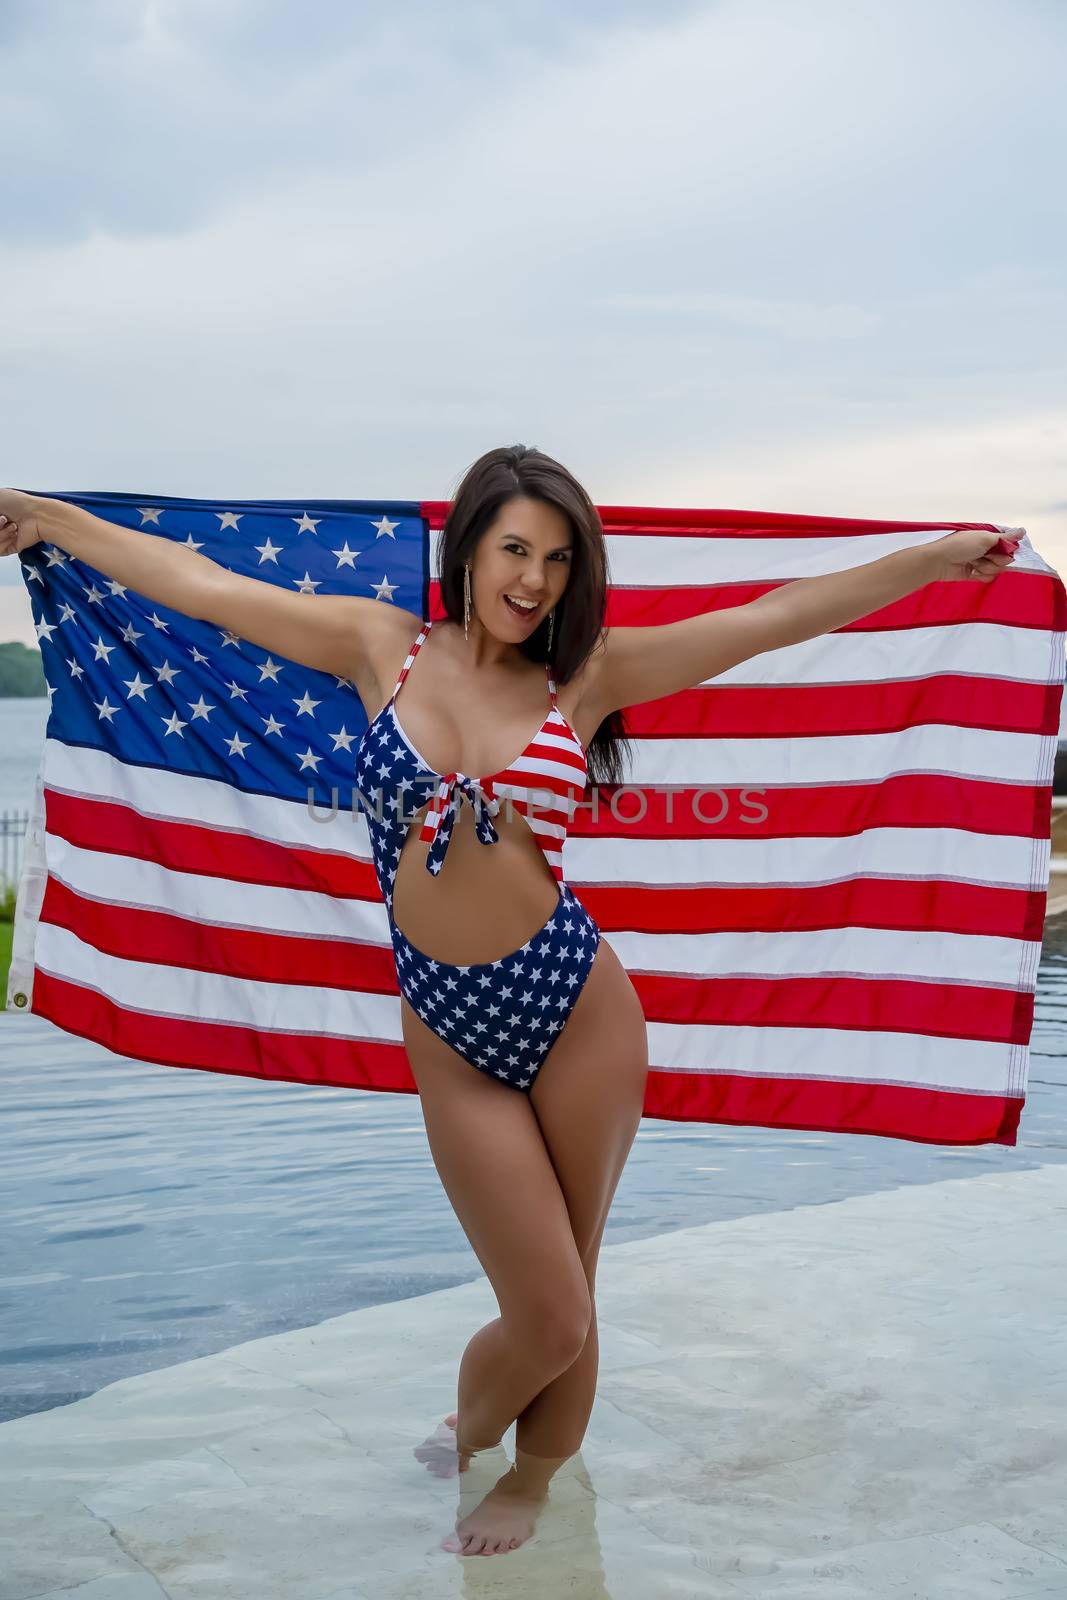 Patriotic Woman Wearing A Bikini Swimsuit by actionsports